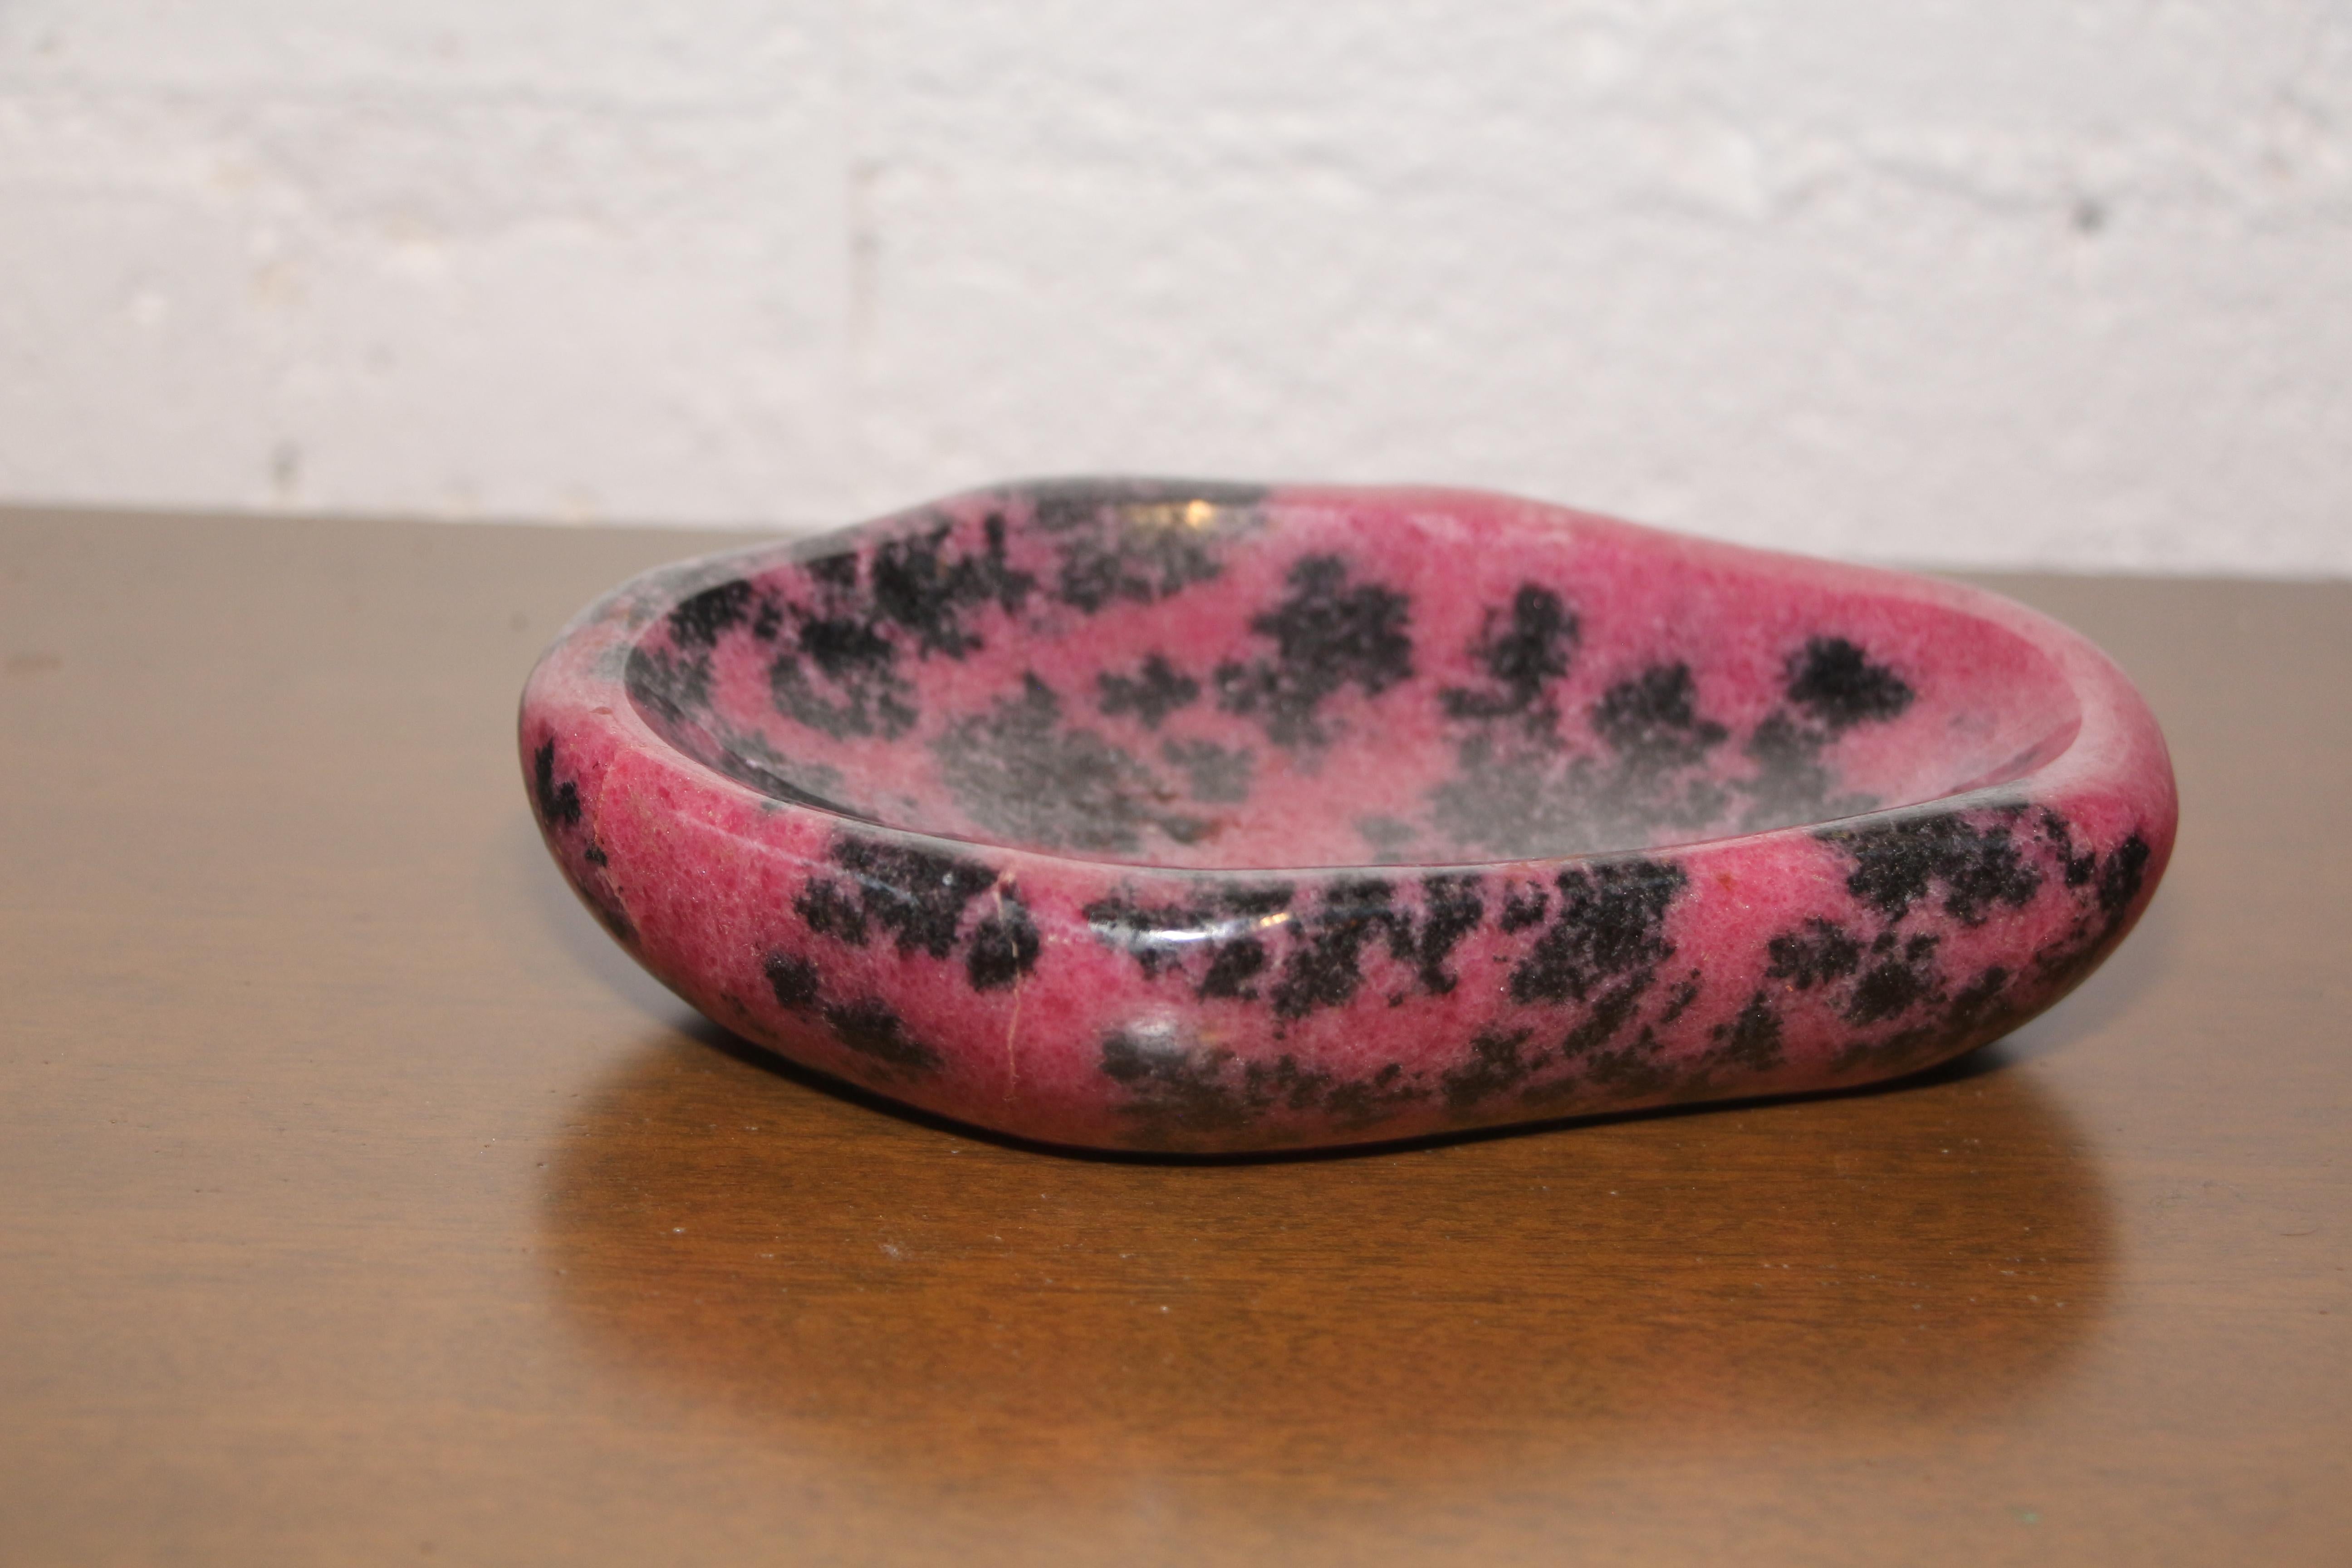 A pair of Mineral Specimen bowls, one is Sodalite and the other in the rarer and more collectible Rhodochrosite. If you are interested in this mineral, please be sure to have a look at a Rhodochrosite box we have listed as well. The Rhodochrosite